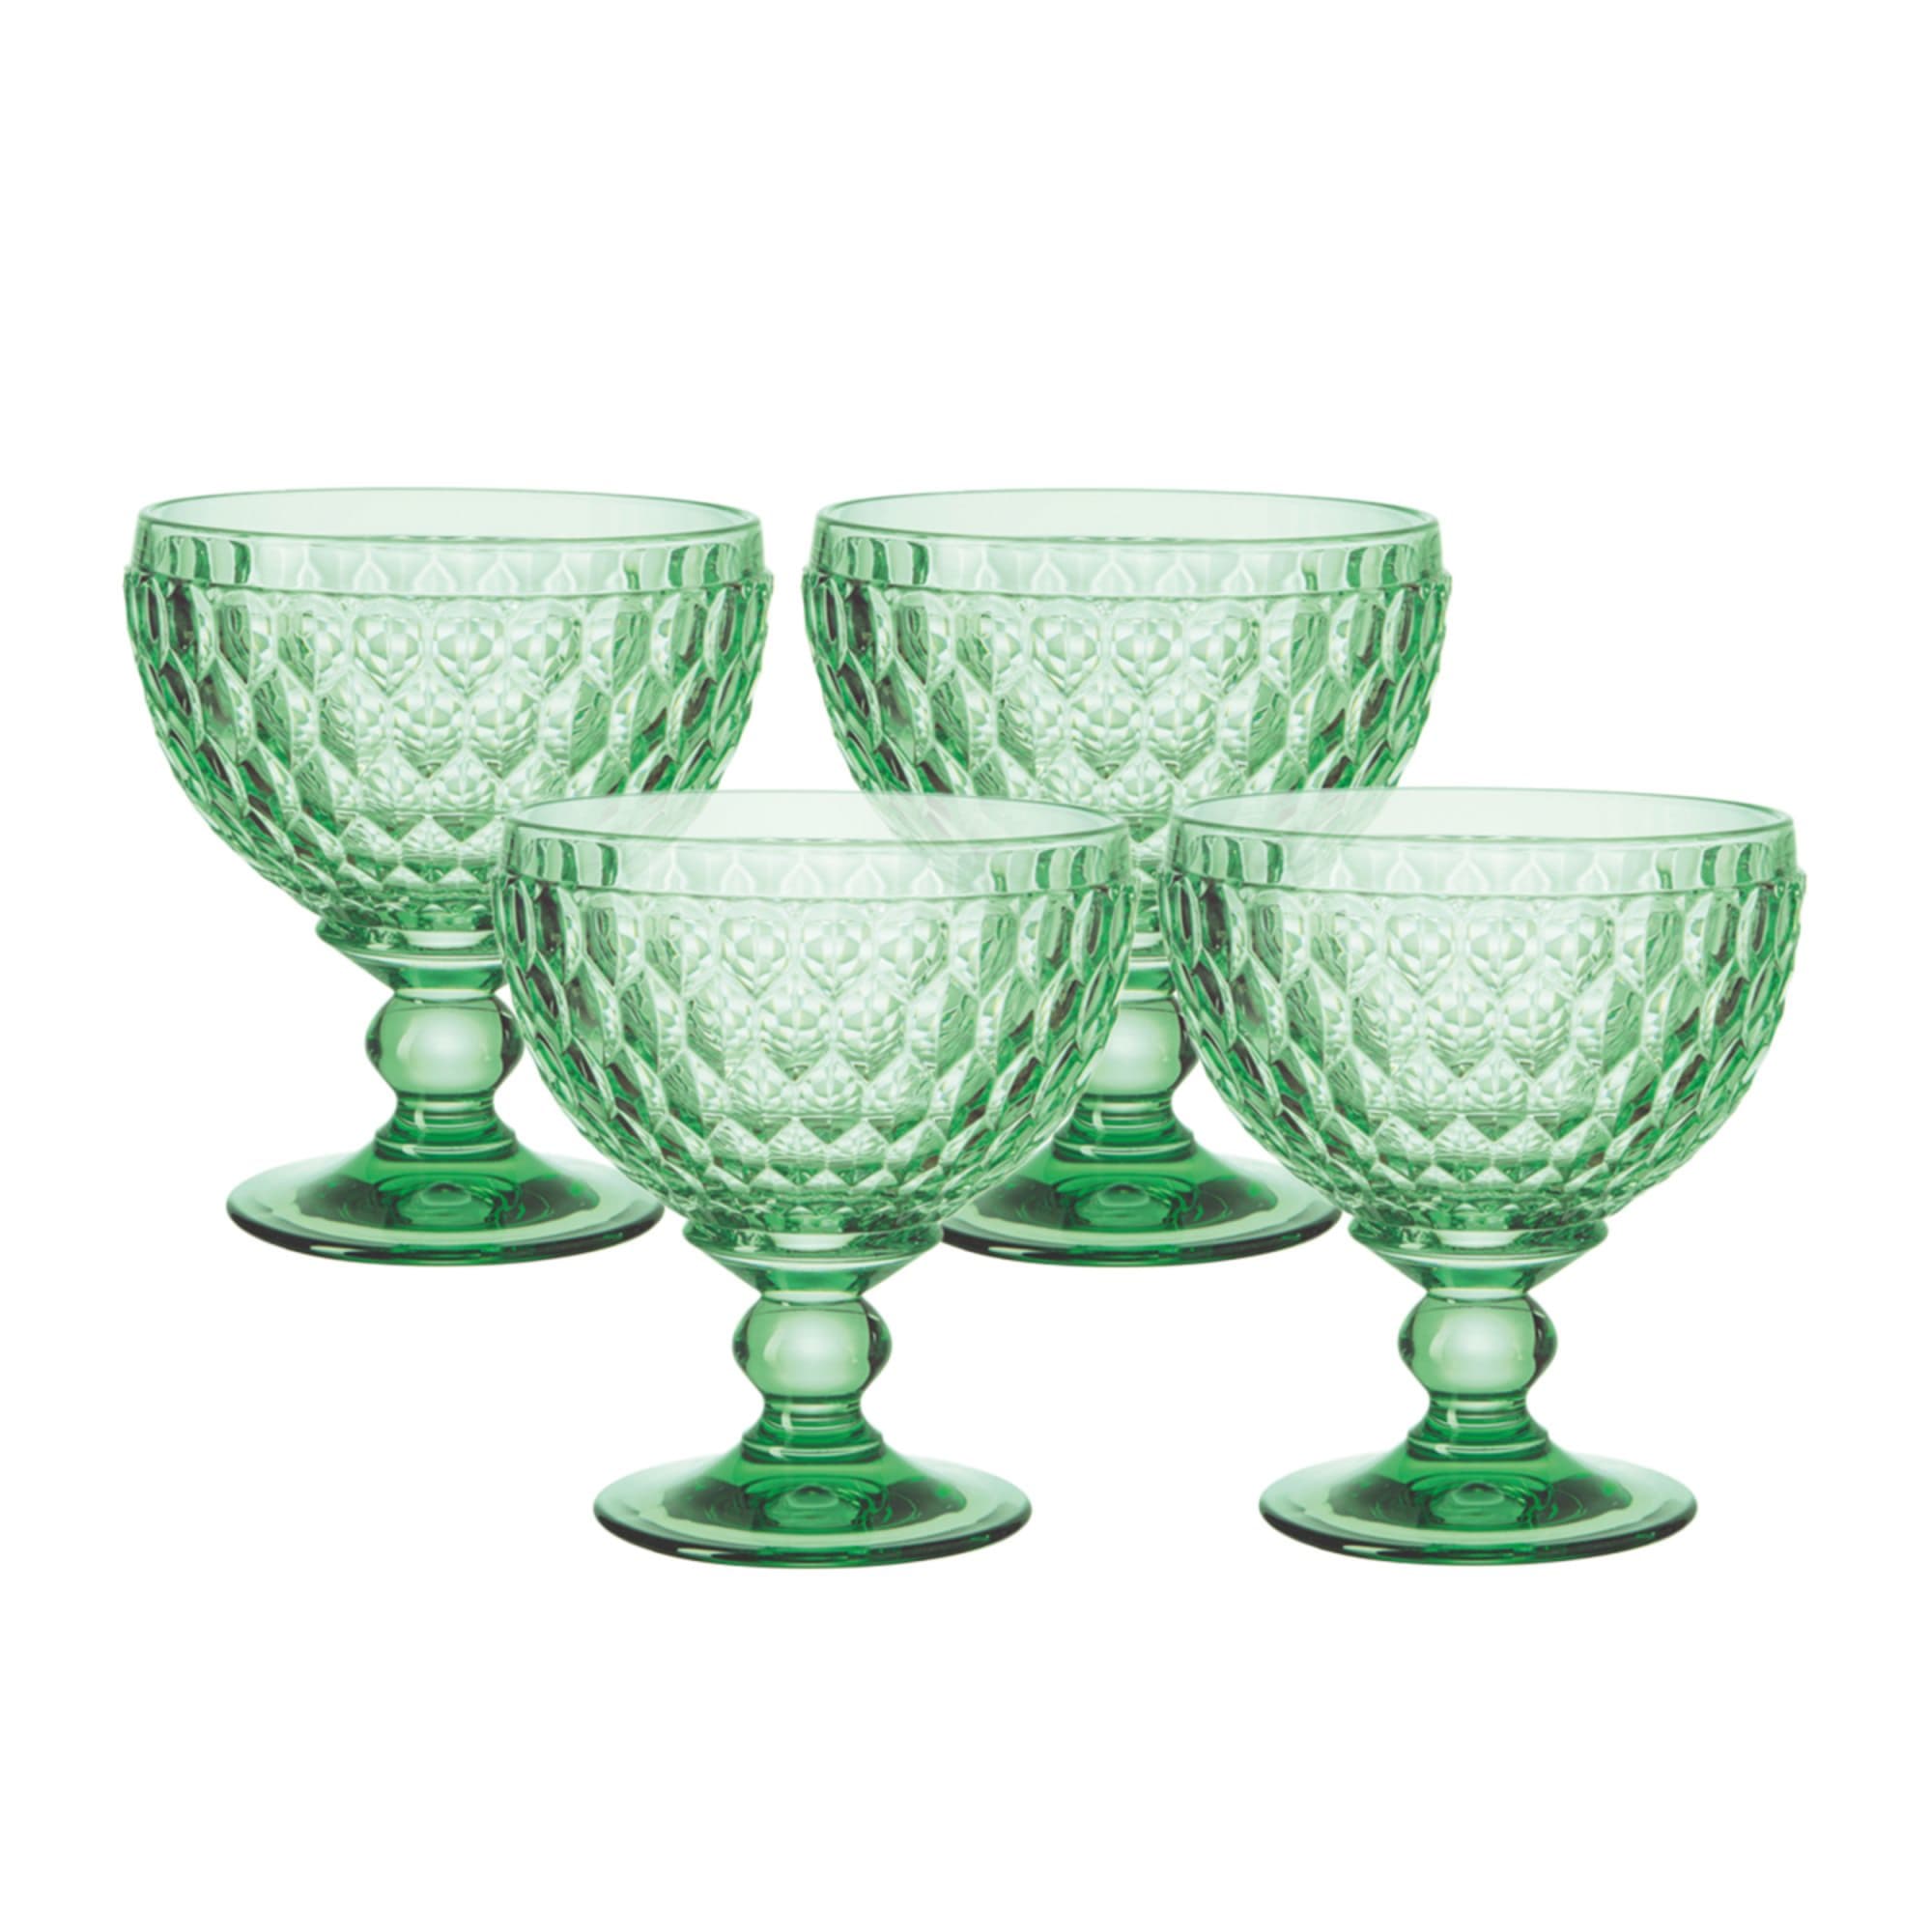 Villeroy & Boch Boston Coloured Champagne Coupe and Dessert Bowl Set of 4 Green Image 1